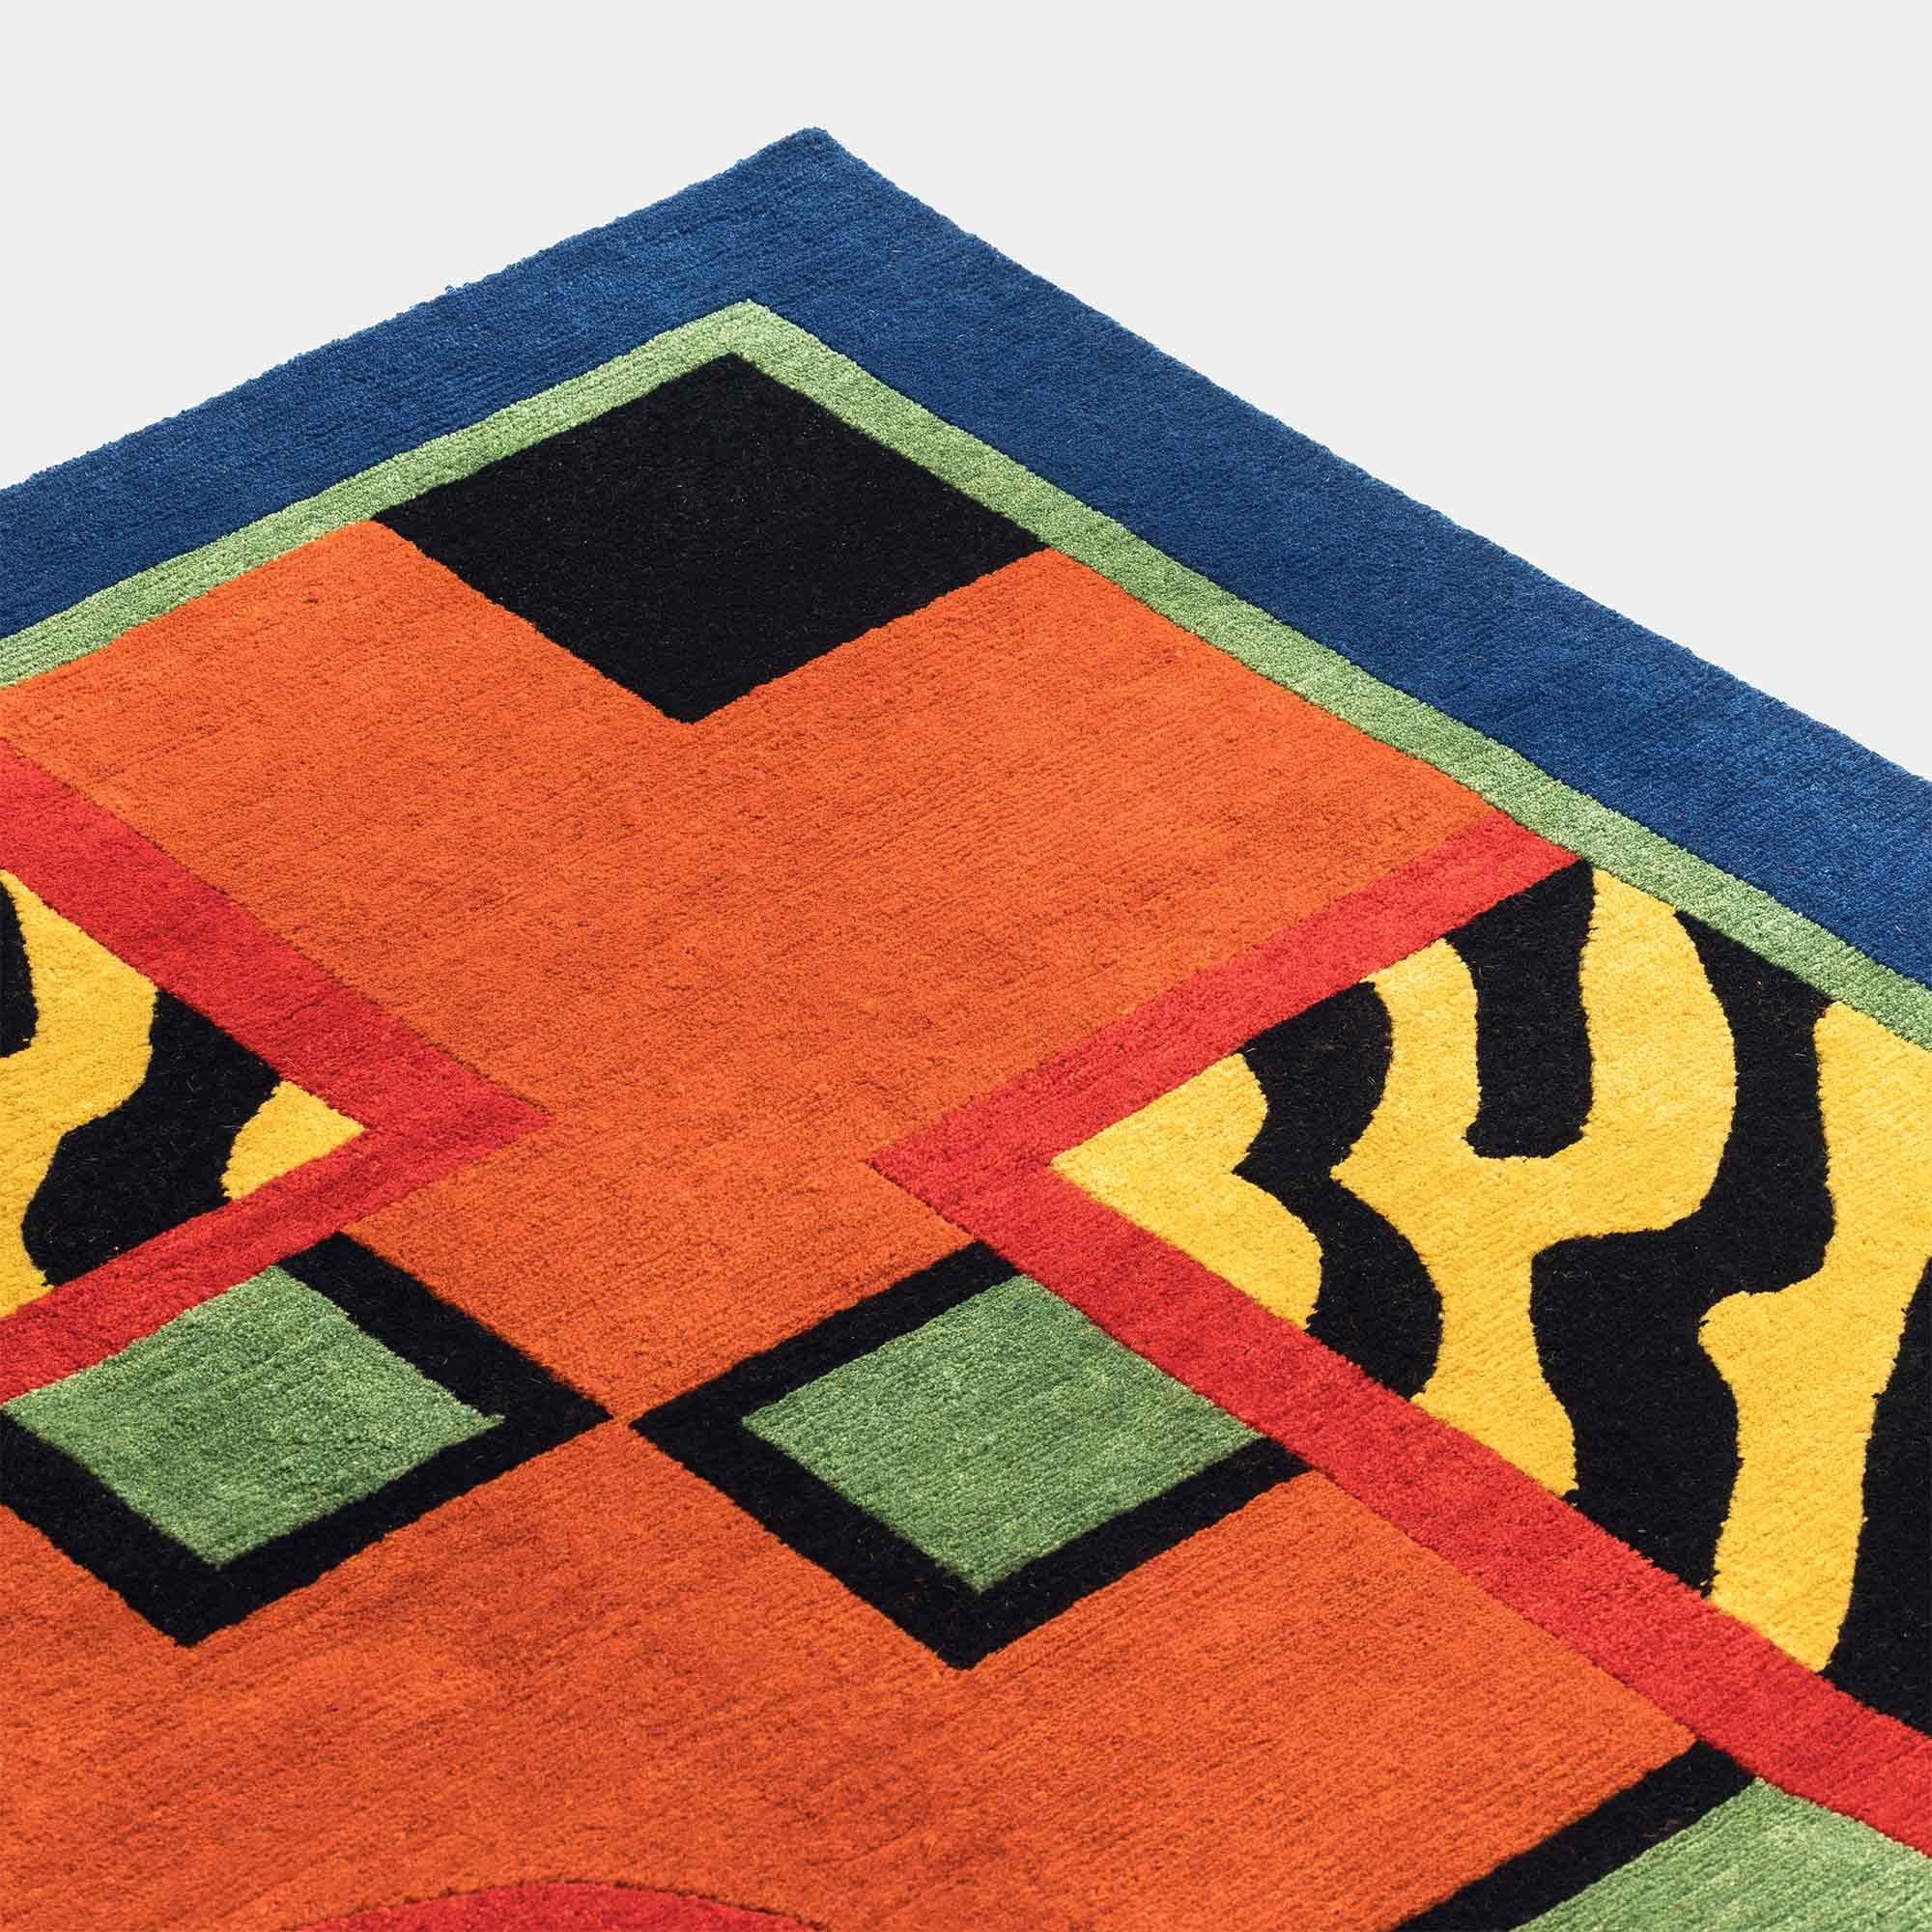 EQUADOR woollen carpet by Nathalie du Pasquier for Post Design collection/Memphis

A woollen carpet handcrafted by different Nepalese artisans. Made in a limited edition of 36 signed, numbered examples.

As the carpet is made by hand, there are